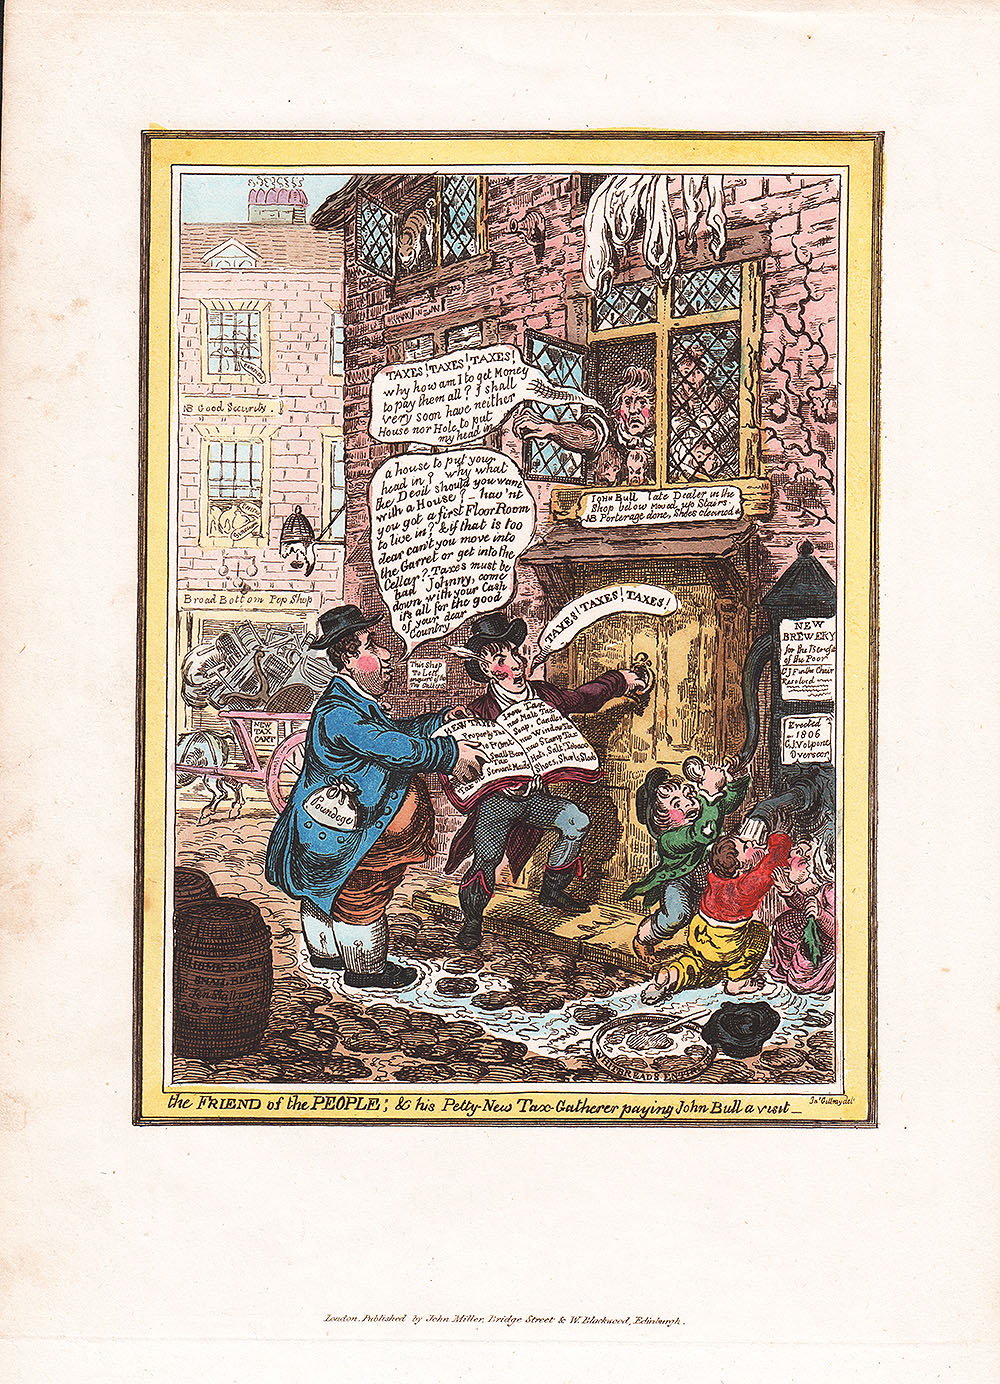 Gillray - The Friend of the People; and his Petty New Tax Gatherer paying John Bull a visit 